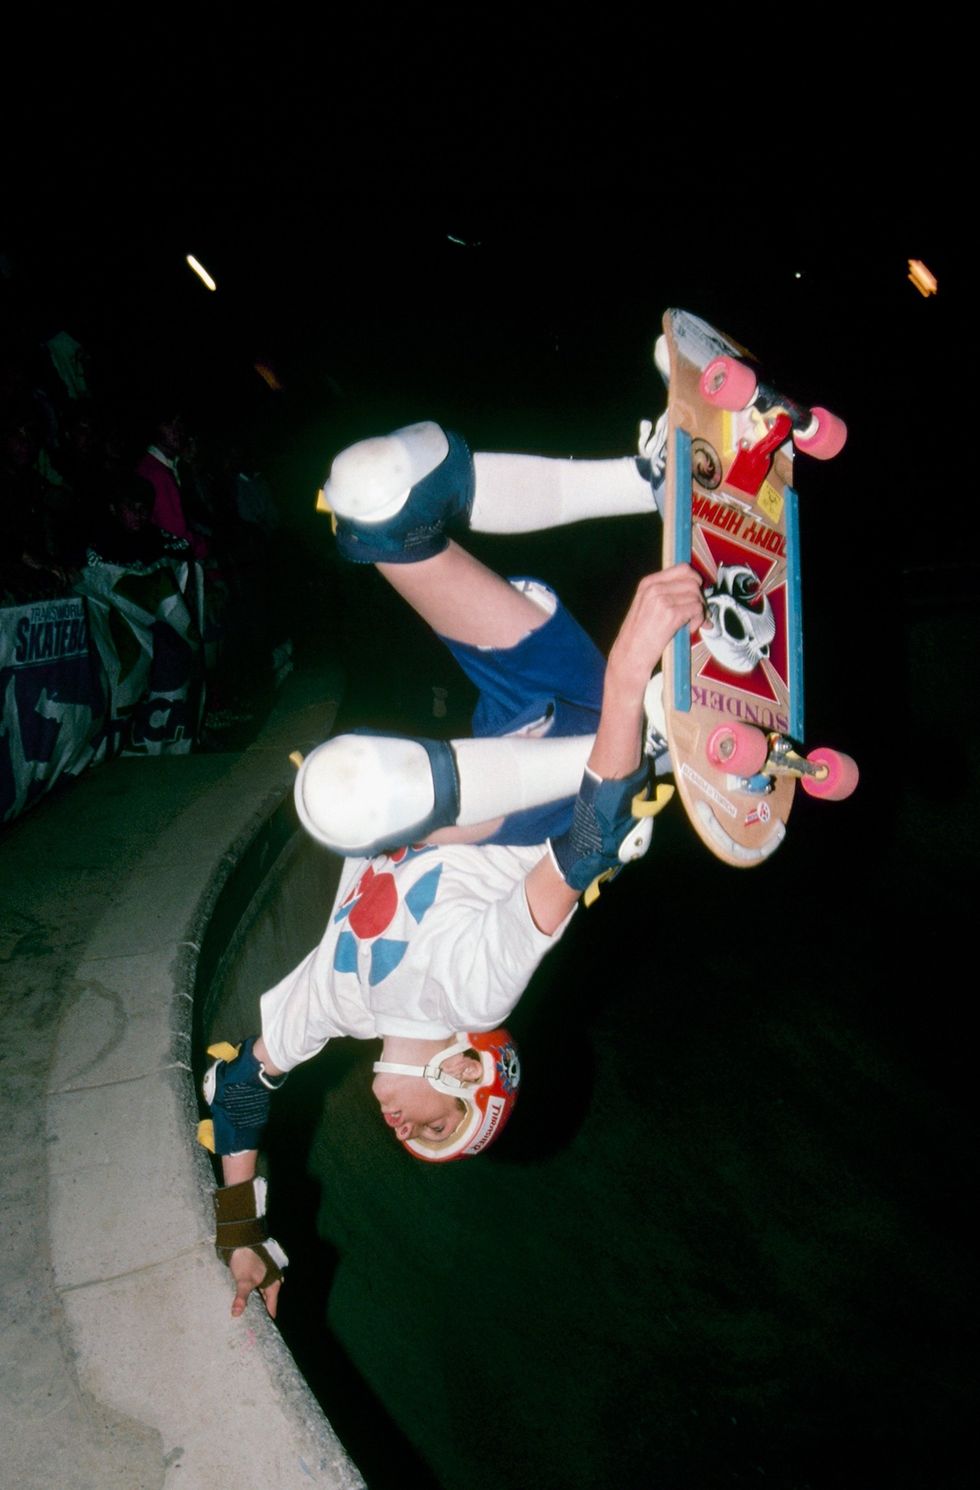 del mar, ca   april 1985  tony hawk, riding for powell peralta skateboards, does an invert as he competes in the national skateboarding association event at the del mar skate ranch in april 1985 in del mar, california  photo by doug pensingergetty images